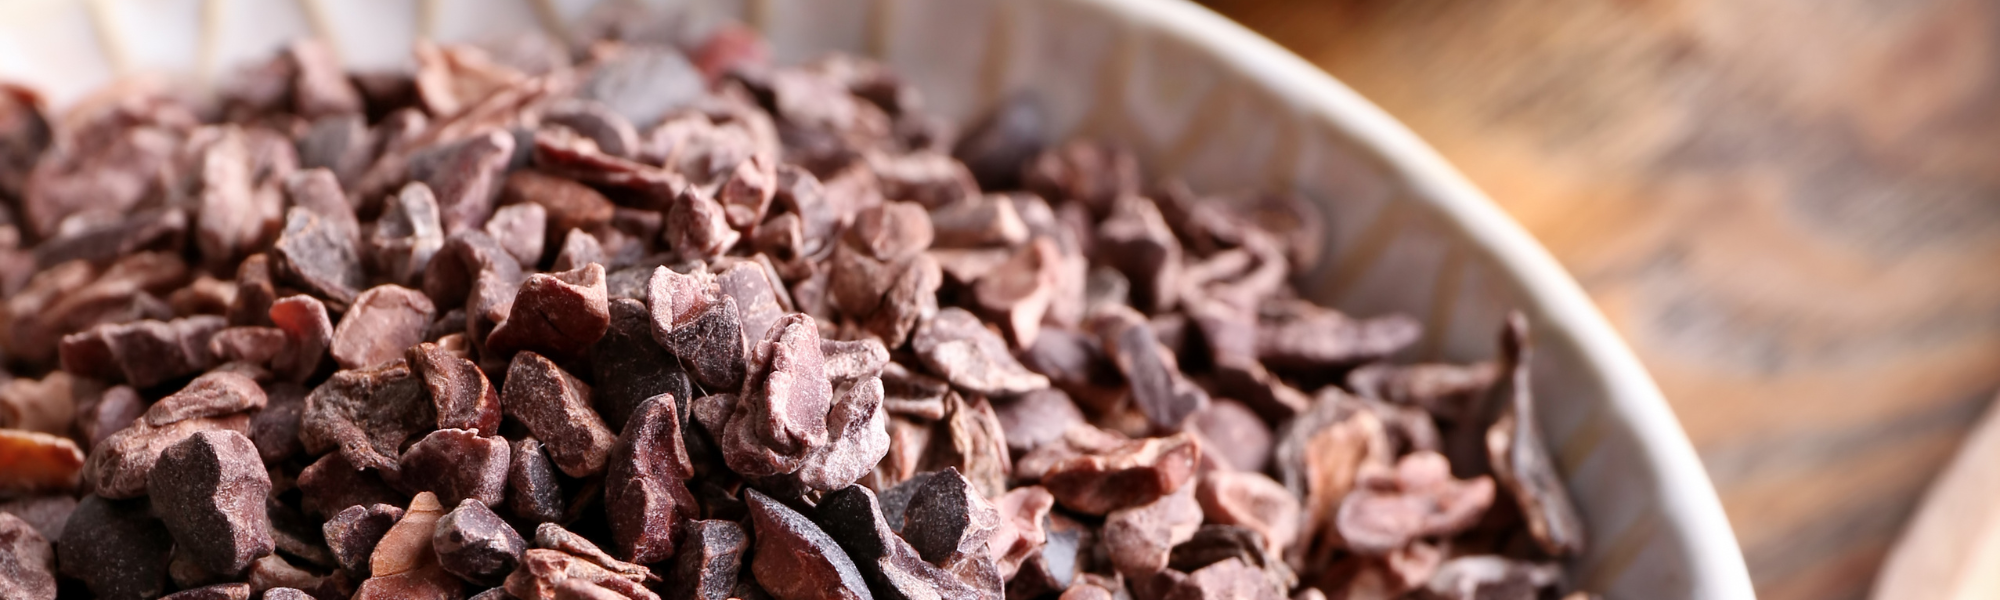 Cacao Nibs close up in a bowl